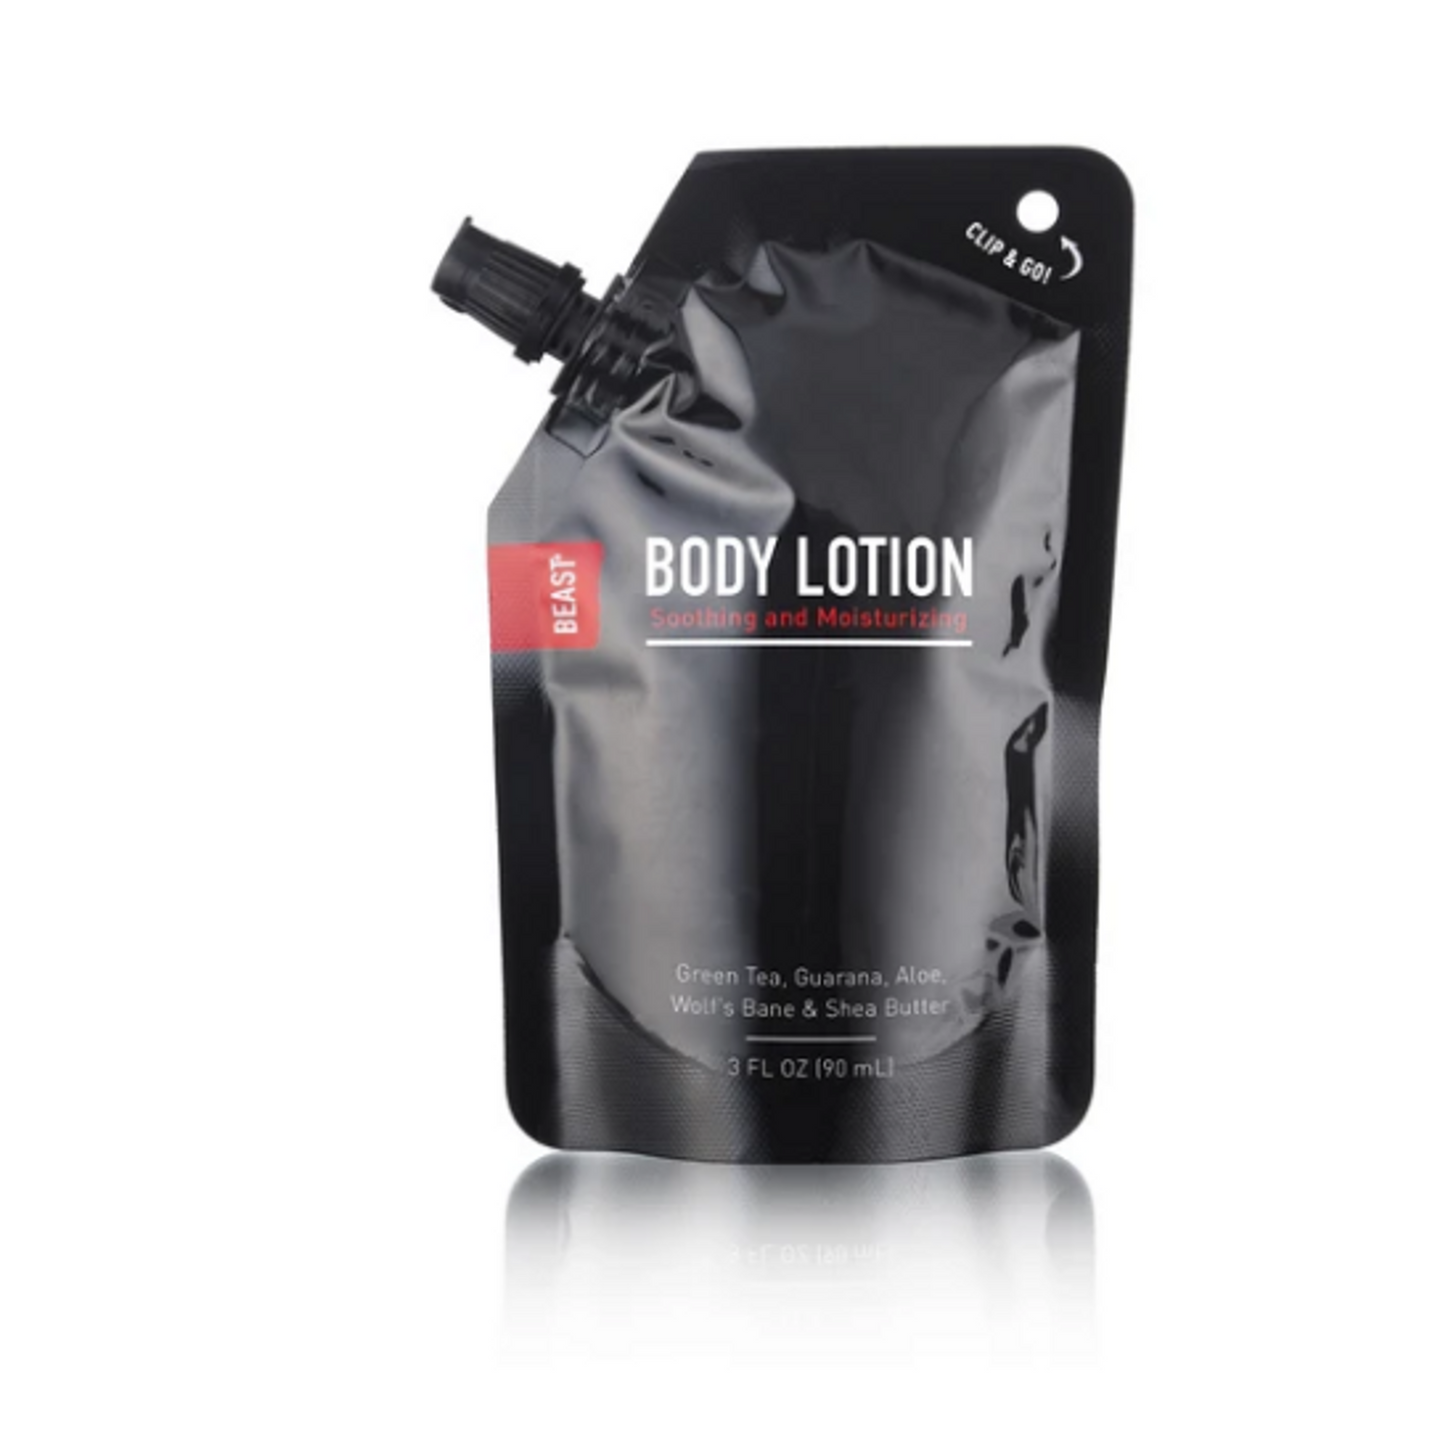 Beast Brands Hand and Body Lotion Travel Size Refill Bag - 3oz.